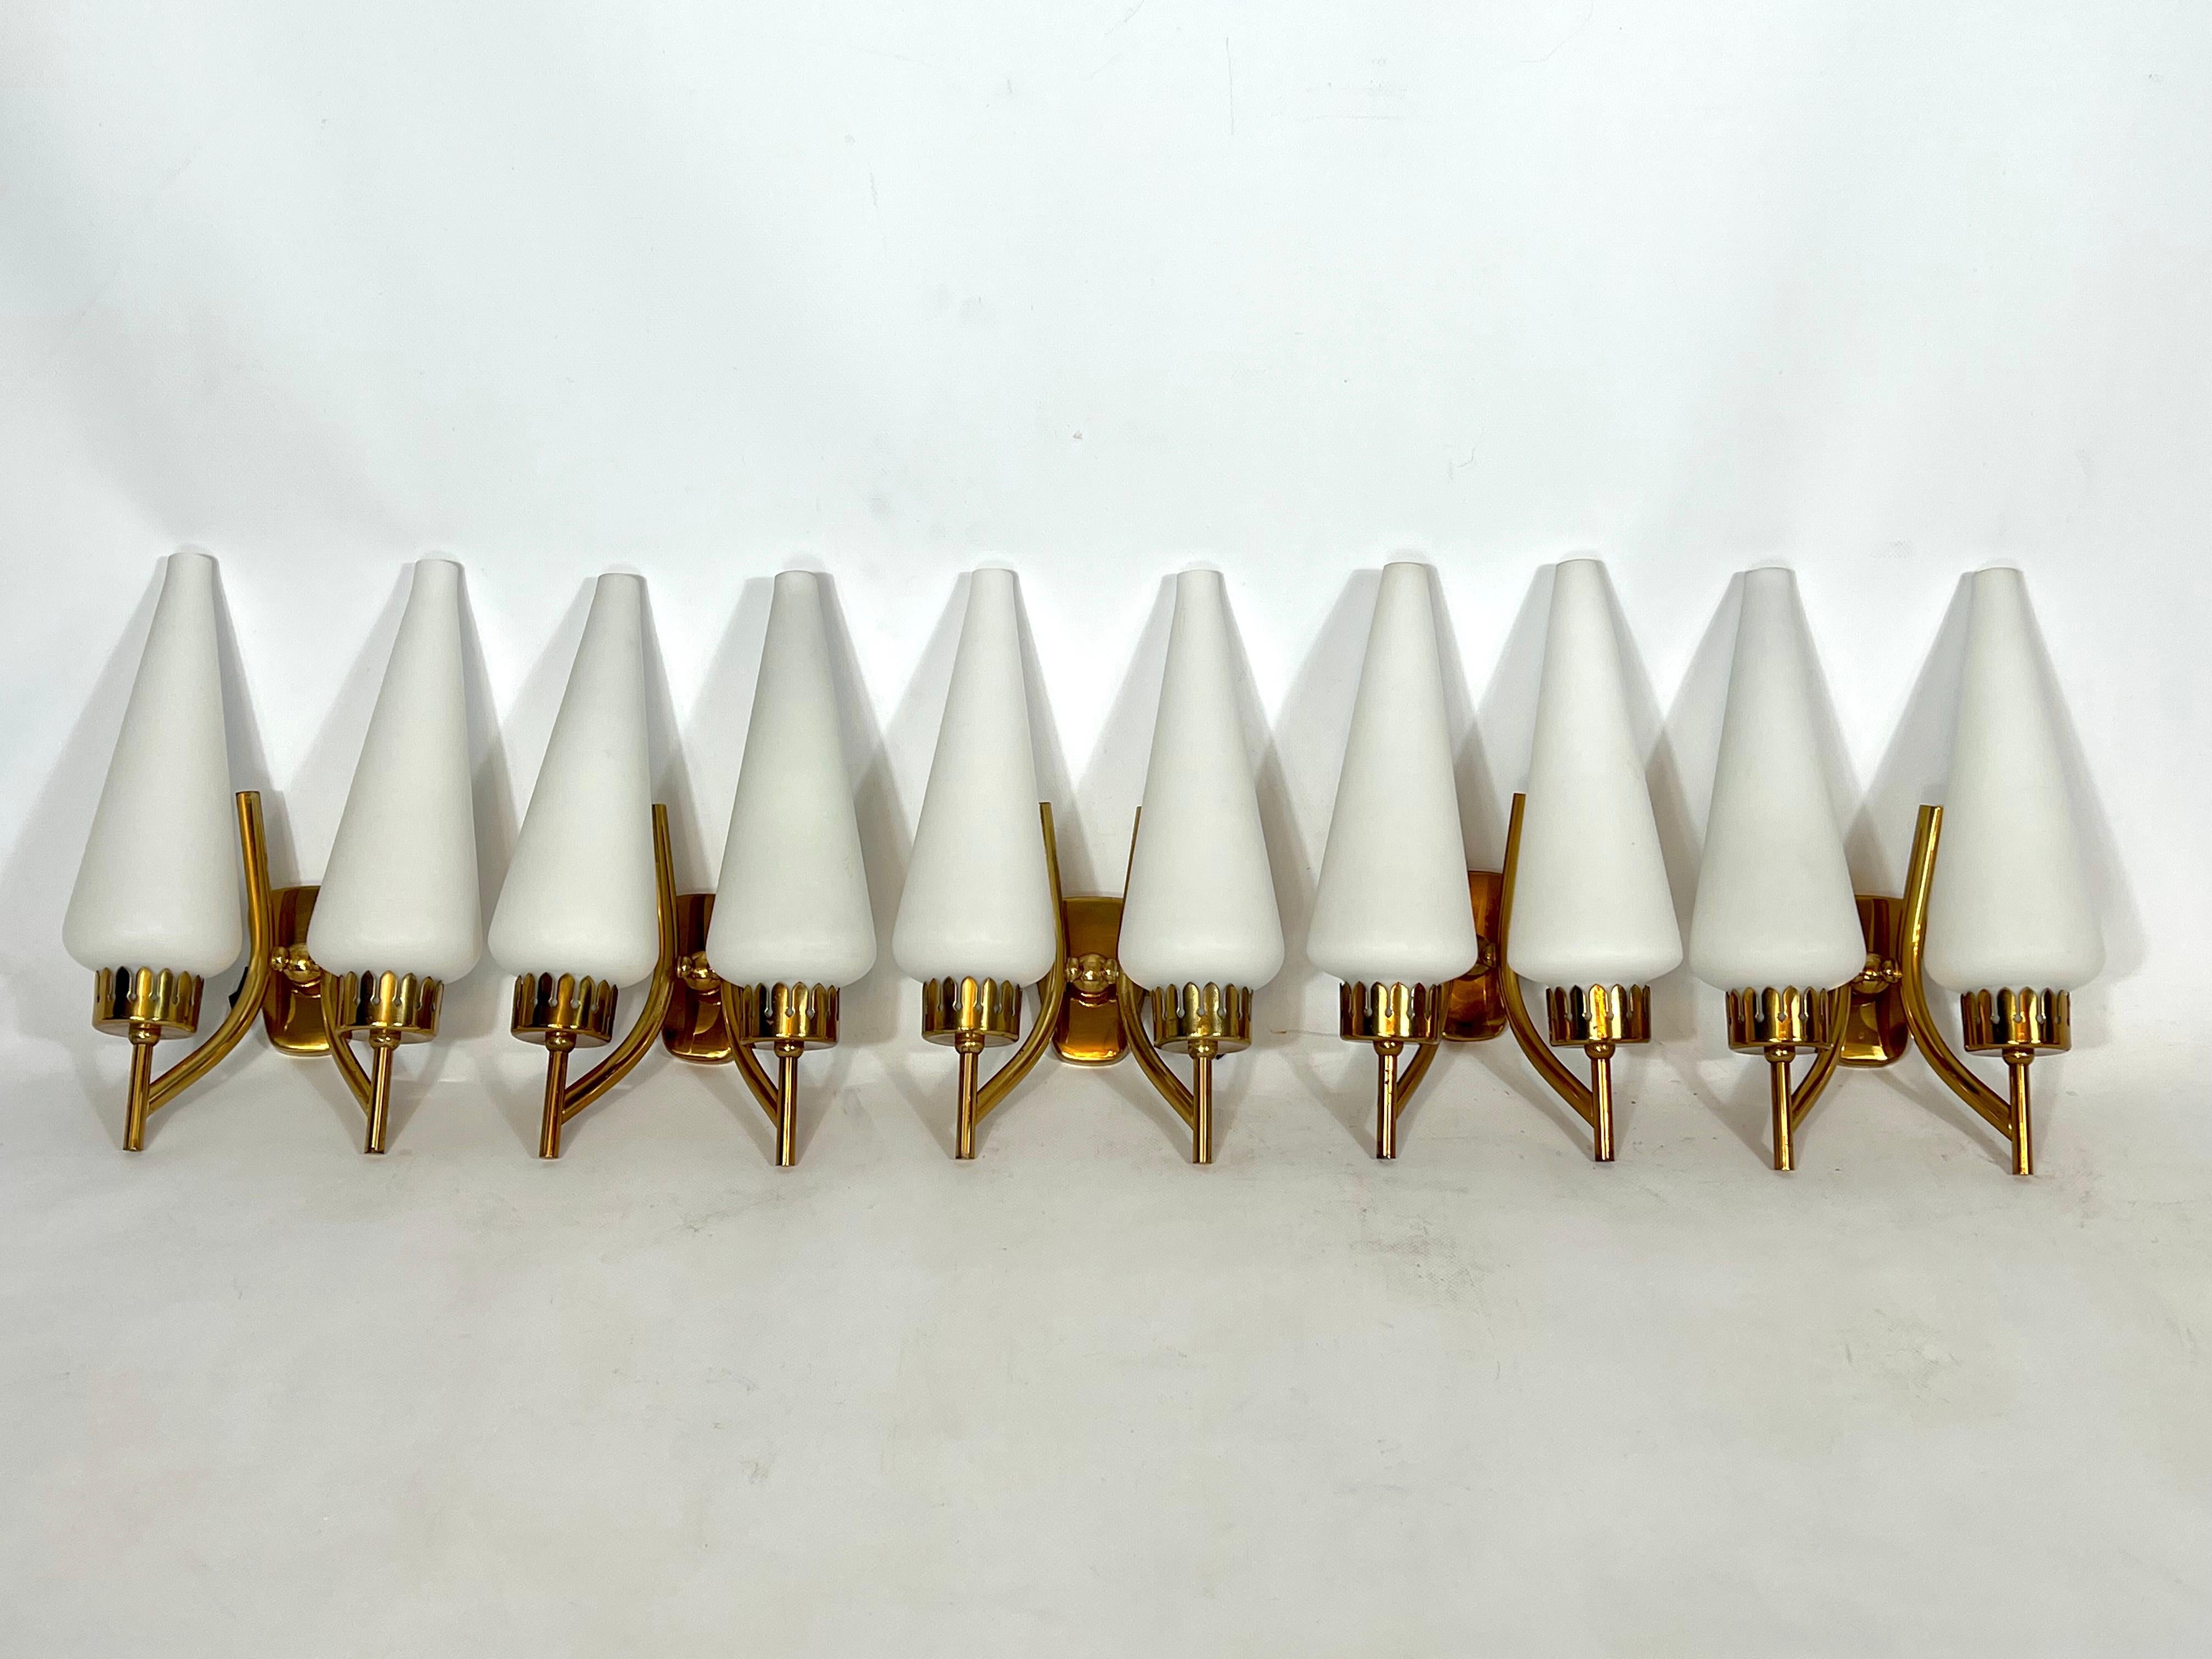 Great vintage condition with normal trace of age and use for this set of five Italian sconces produced during the 50s and reminiscent of Arredoluce Monza style. Made from solid brass and triplex opaline glasses. Full working with EU standard,